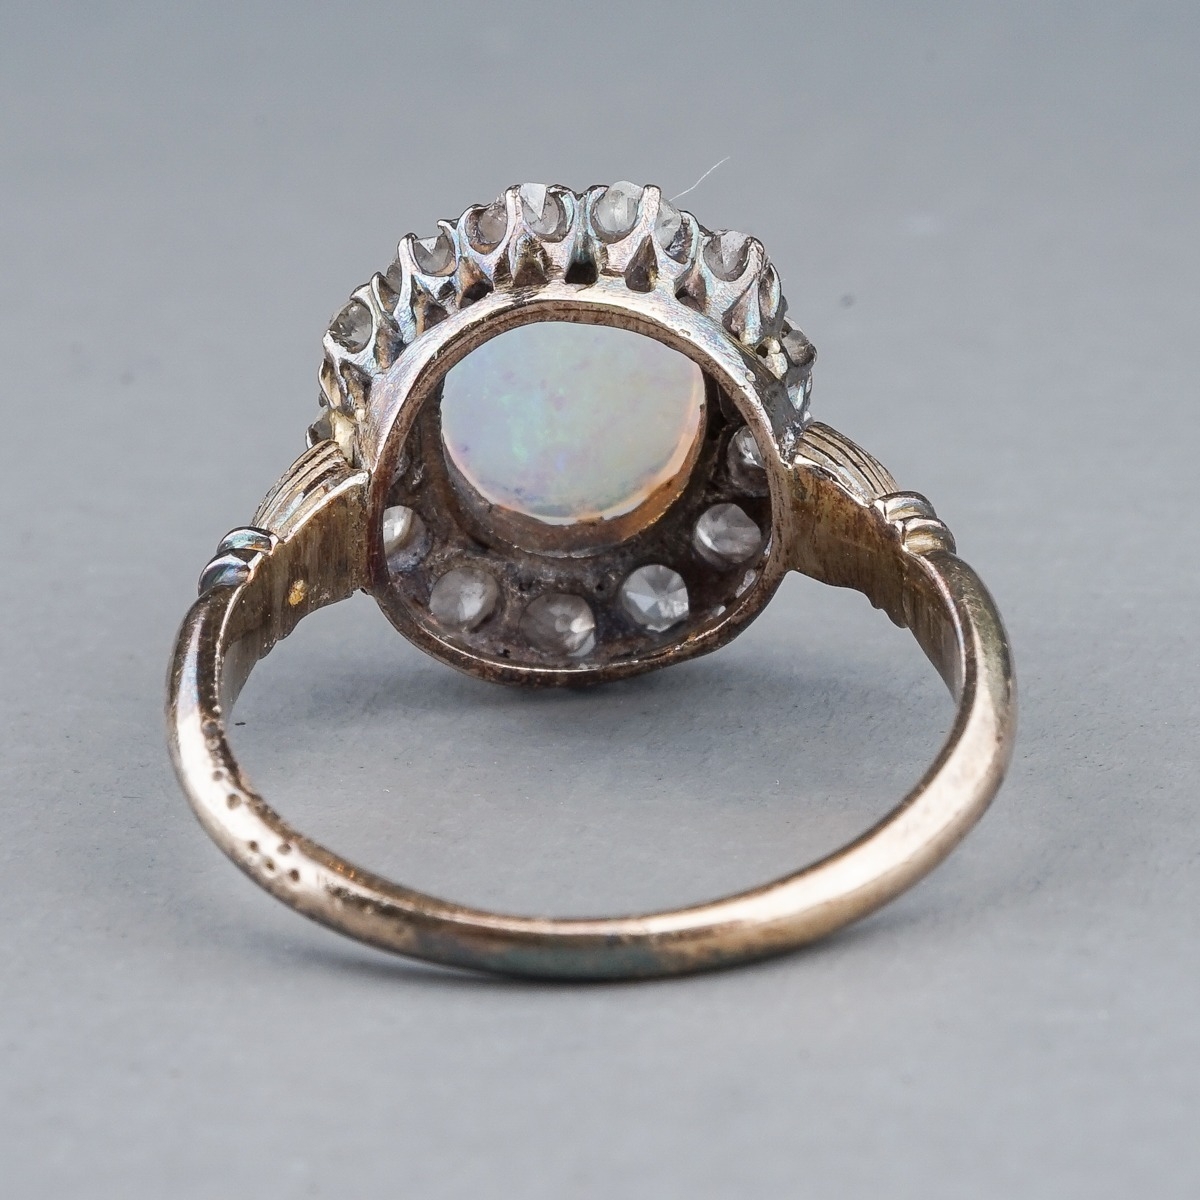 An Edwardian opal and diamond dress ring, set with an oval cabochon precious opal approx 7mm x 8. - Image 6 of 6